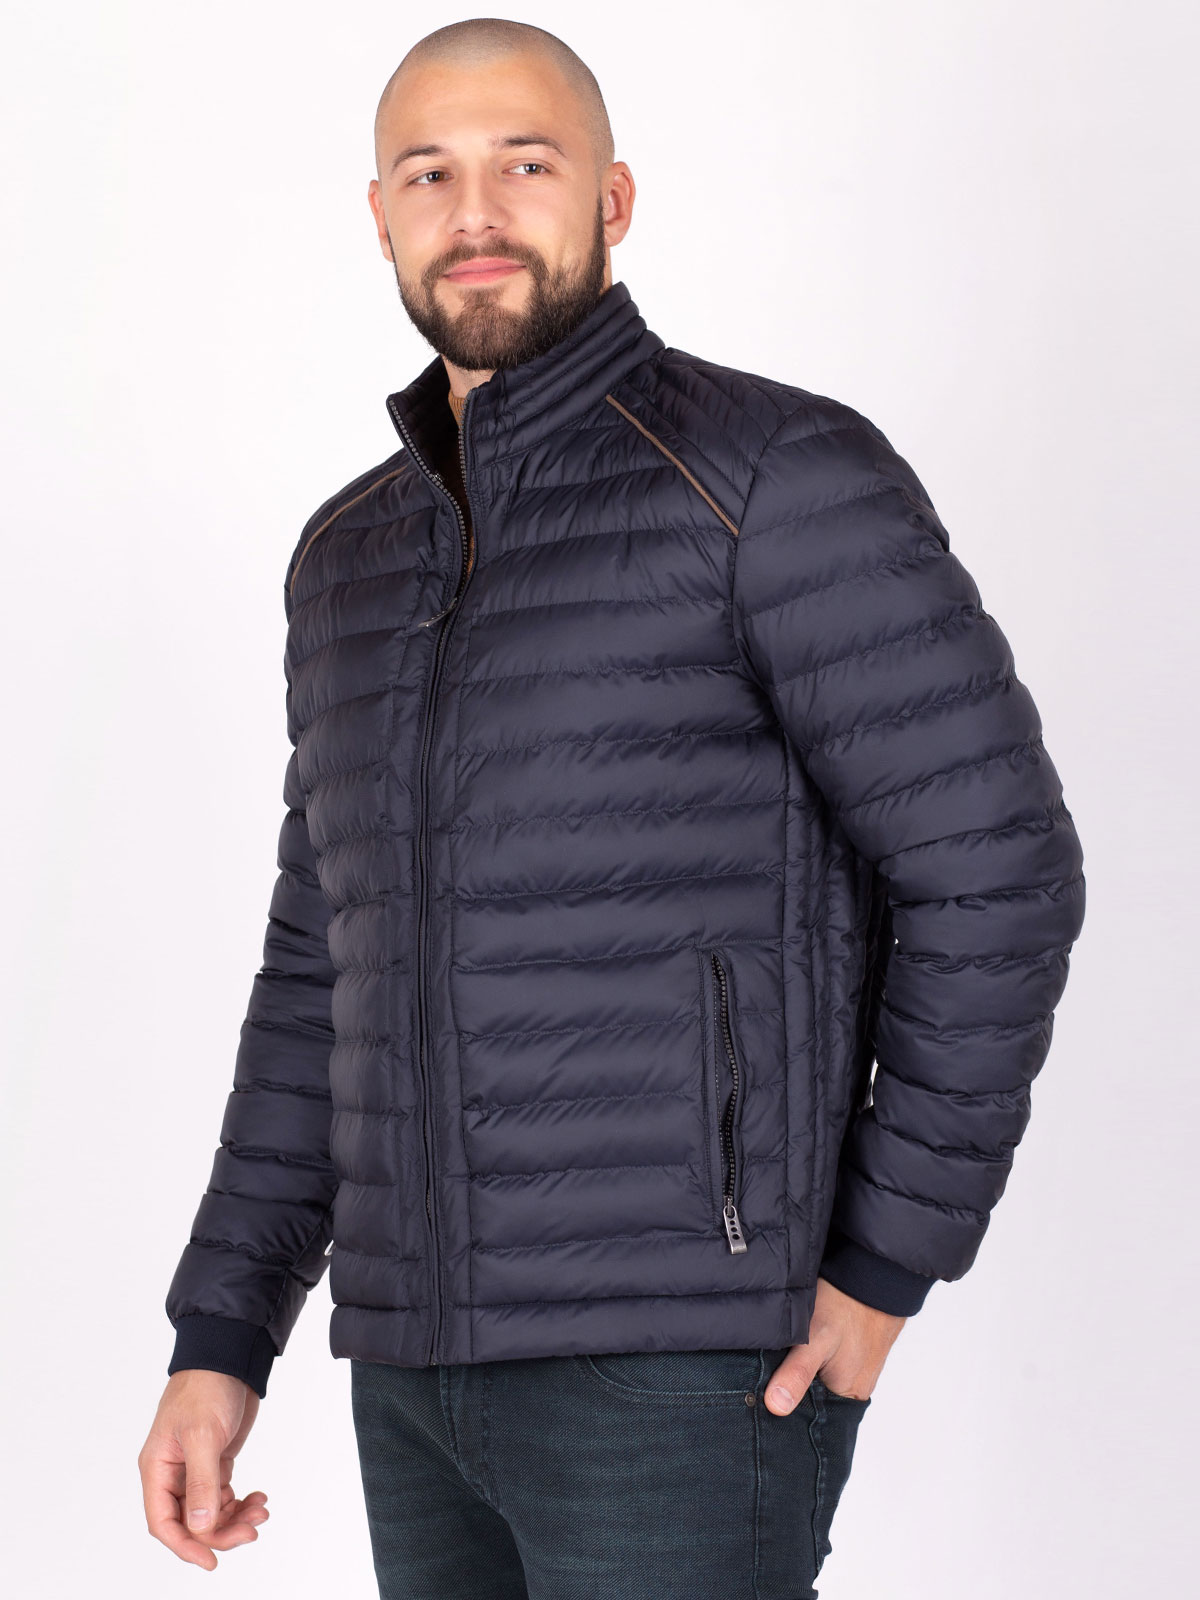 Mens blue jacket with brown accent - 65113 € 72.55 img2